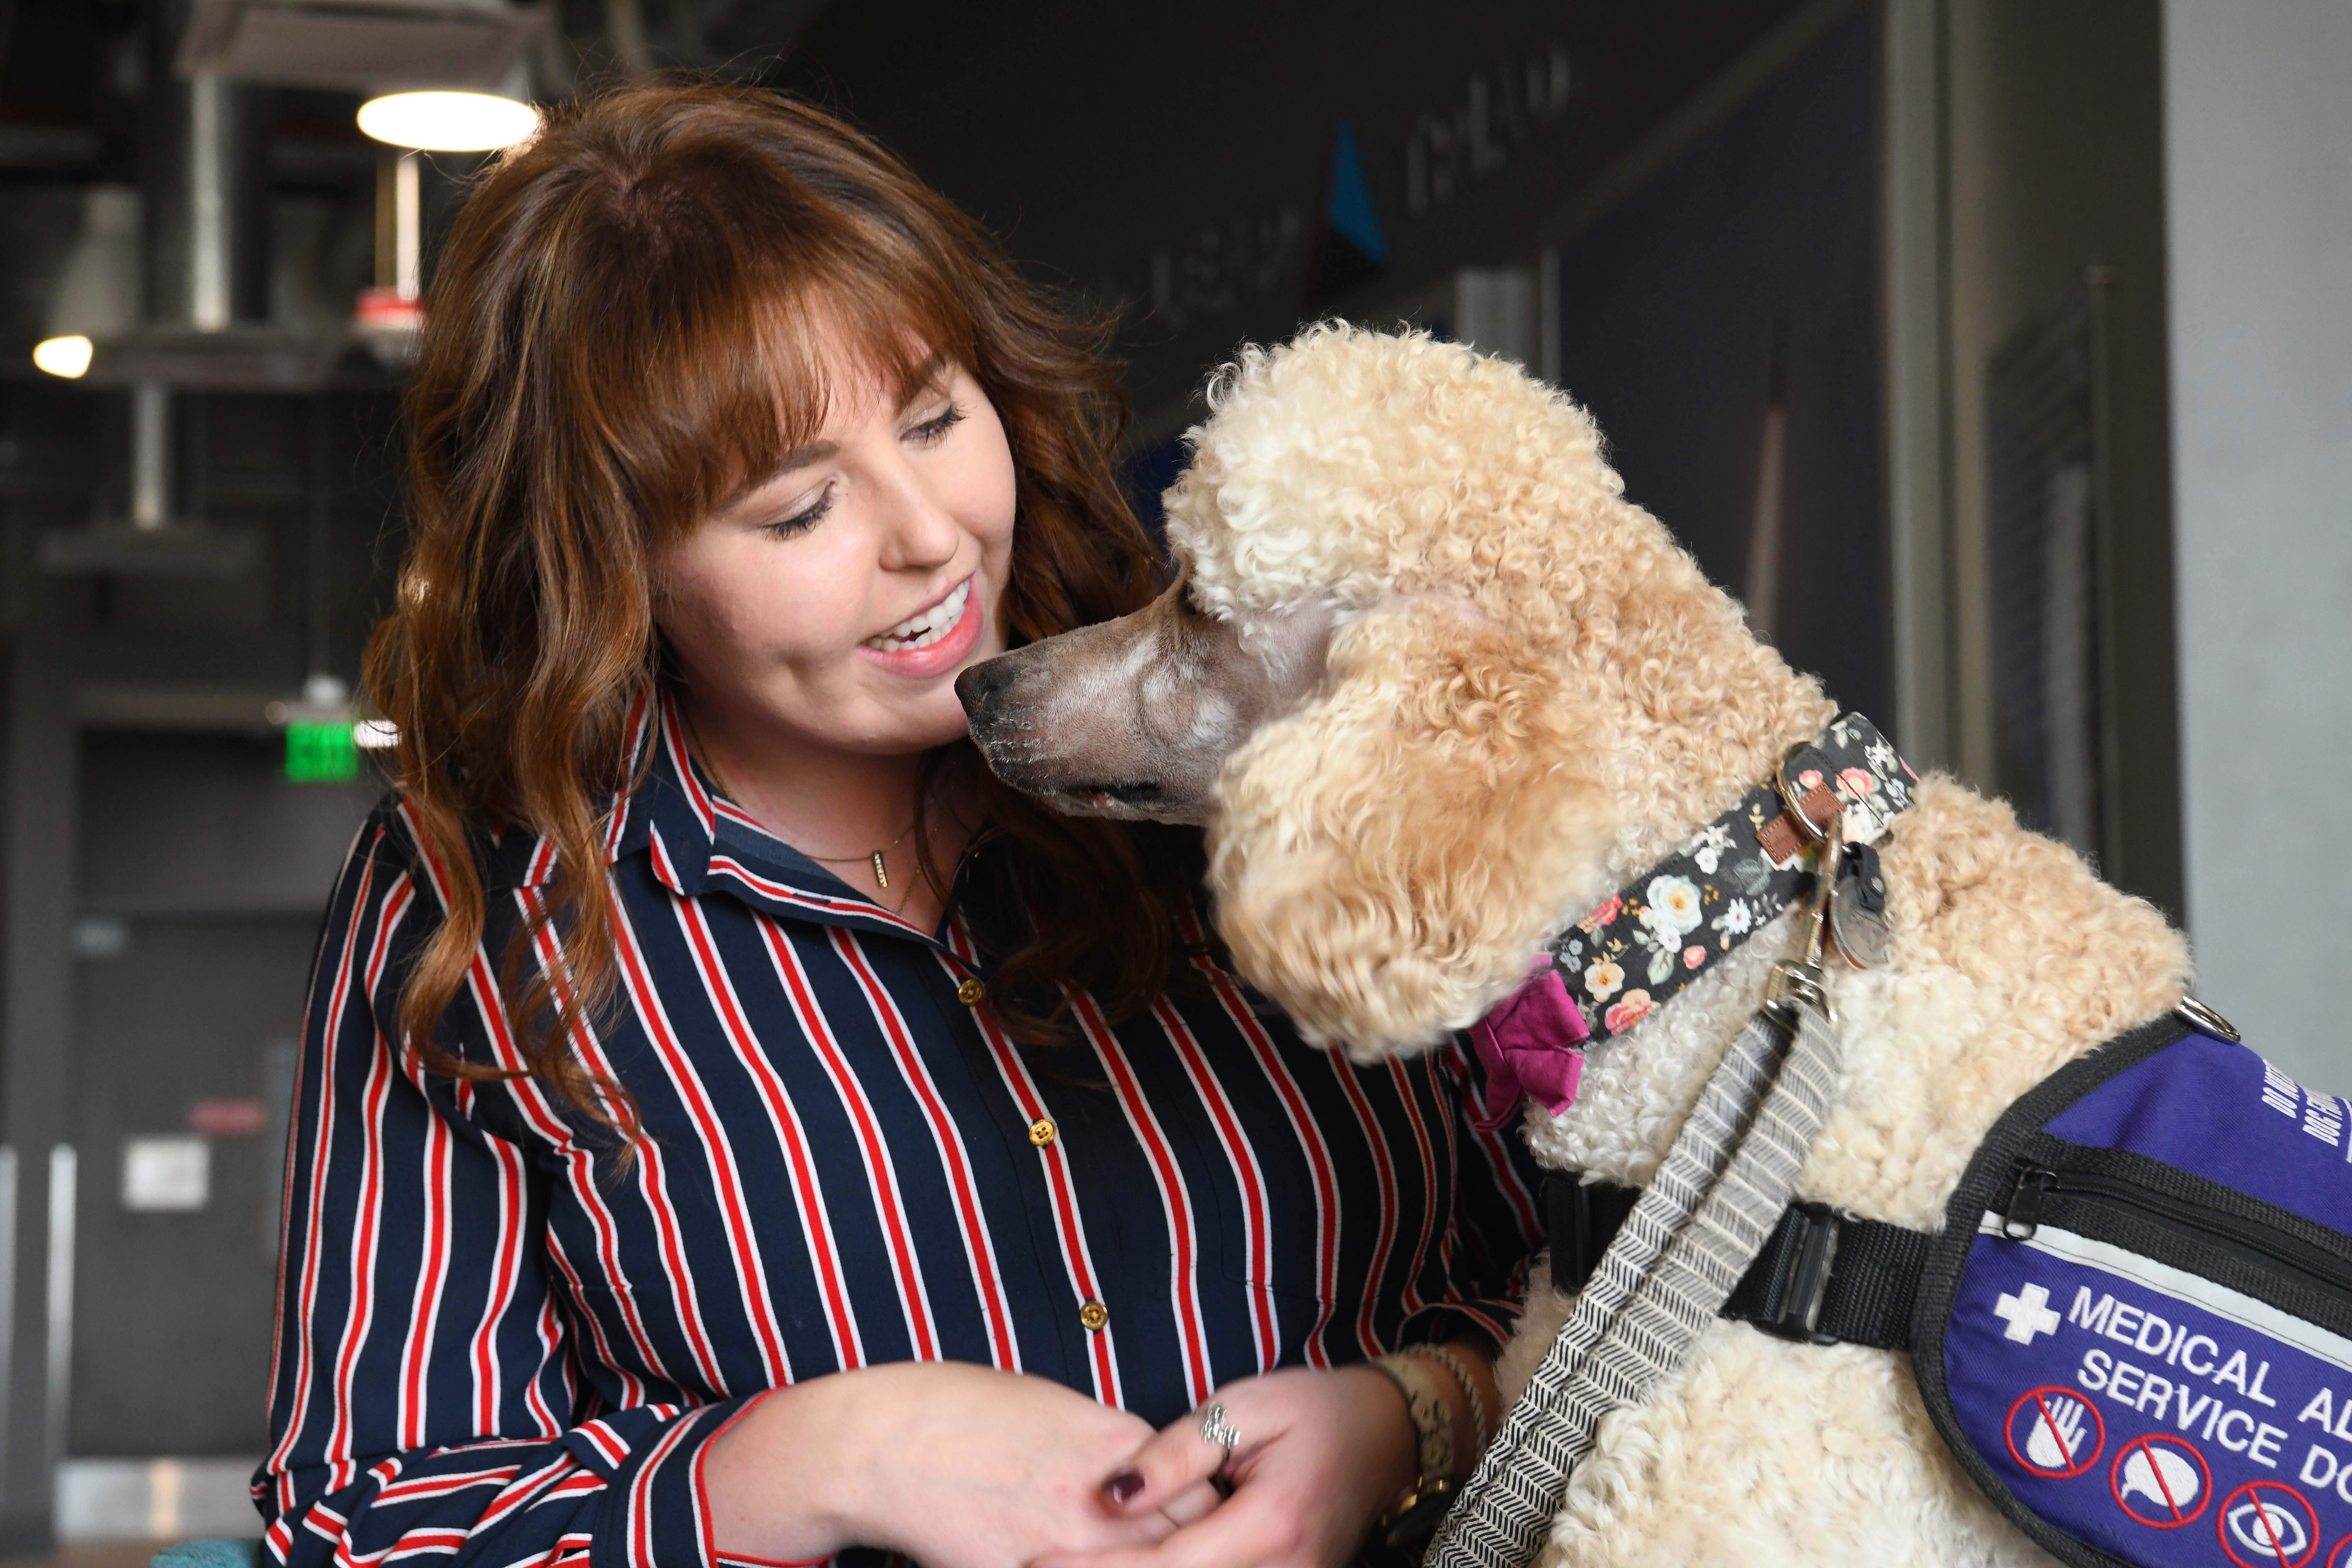 Pantexan Claire Streeter is open to educating people about Type 1 diabetes and service dogs like her standard poodle, Betty.